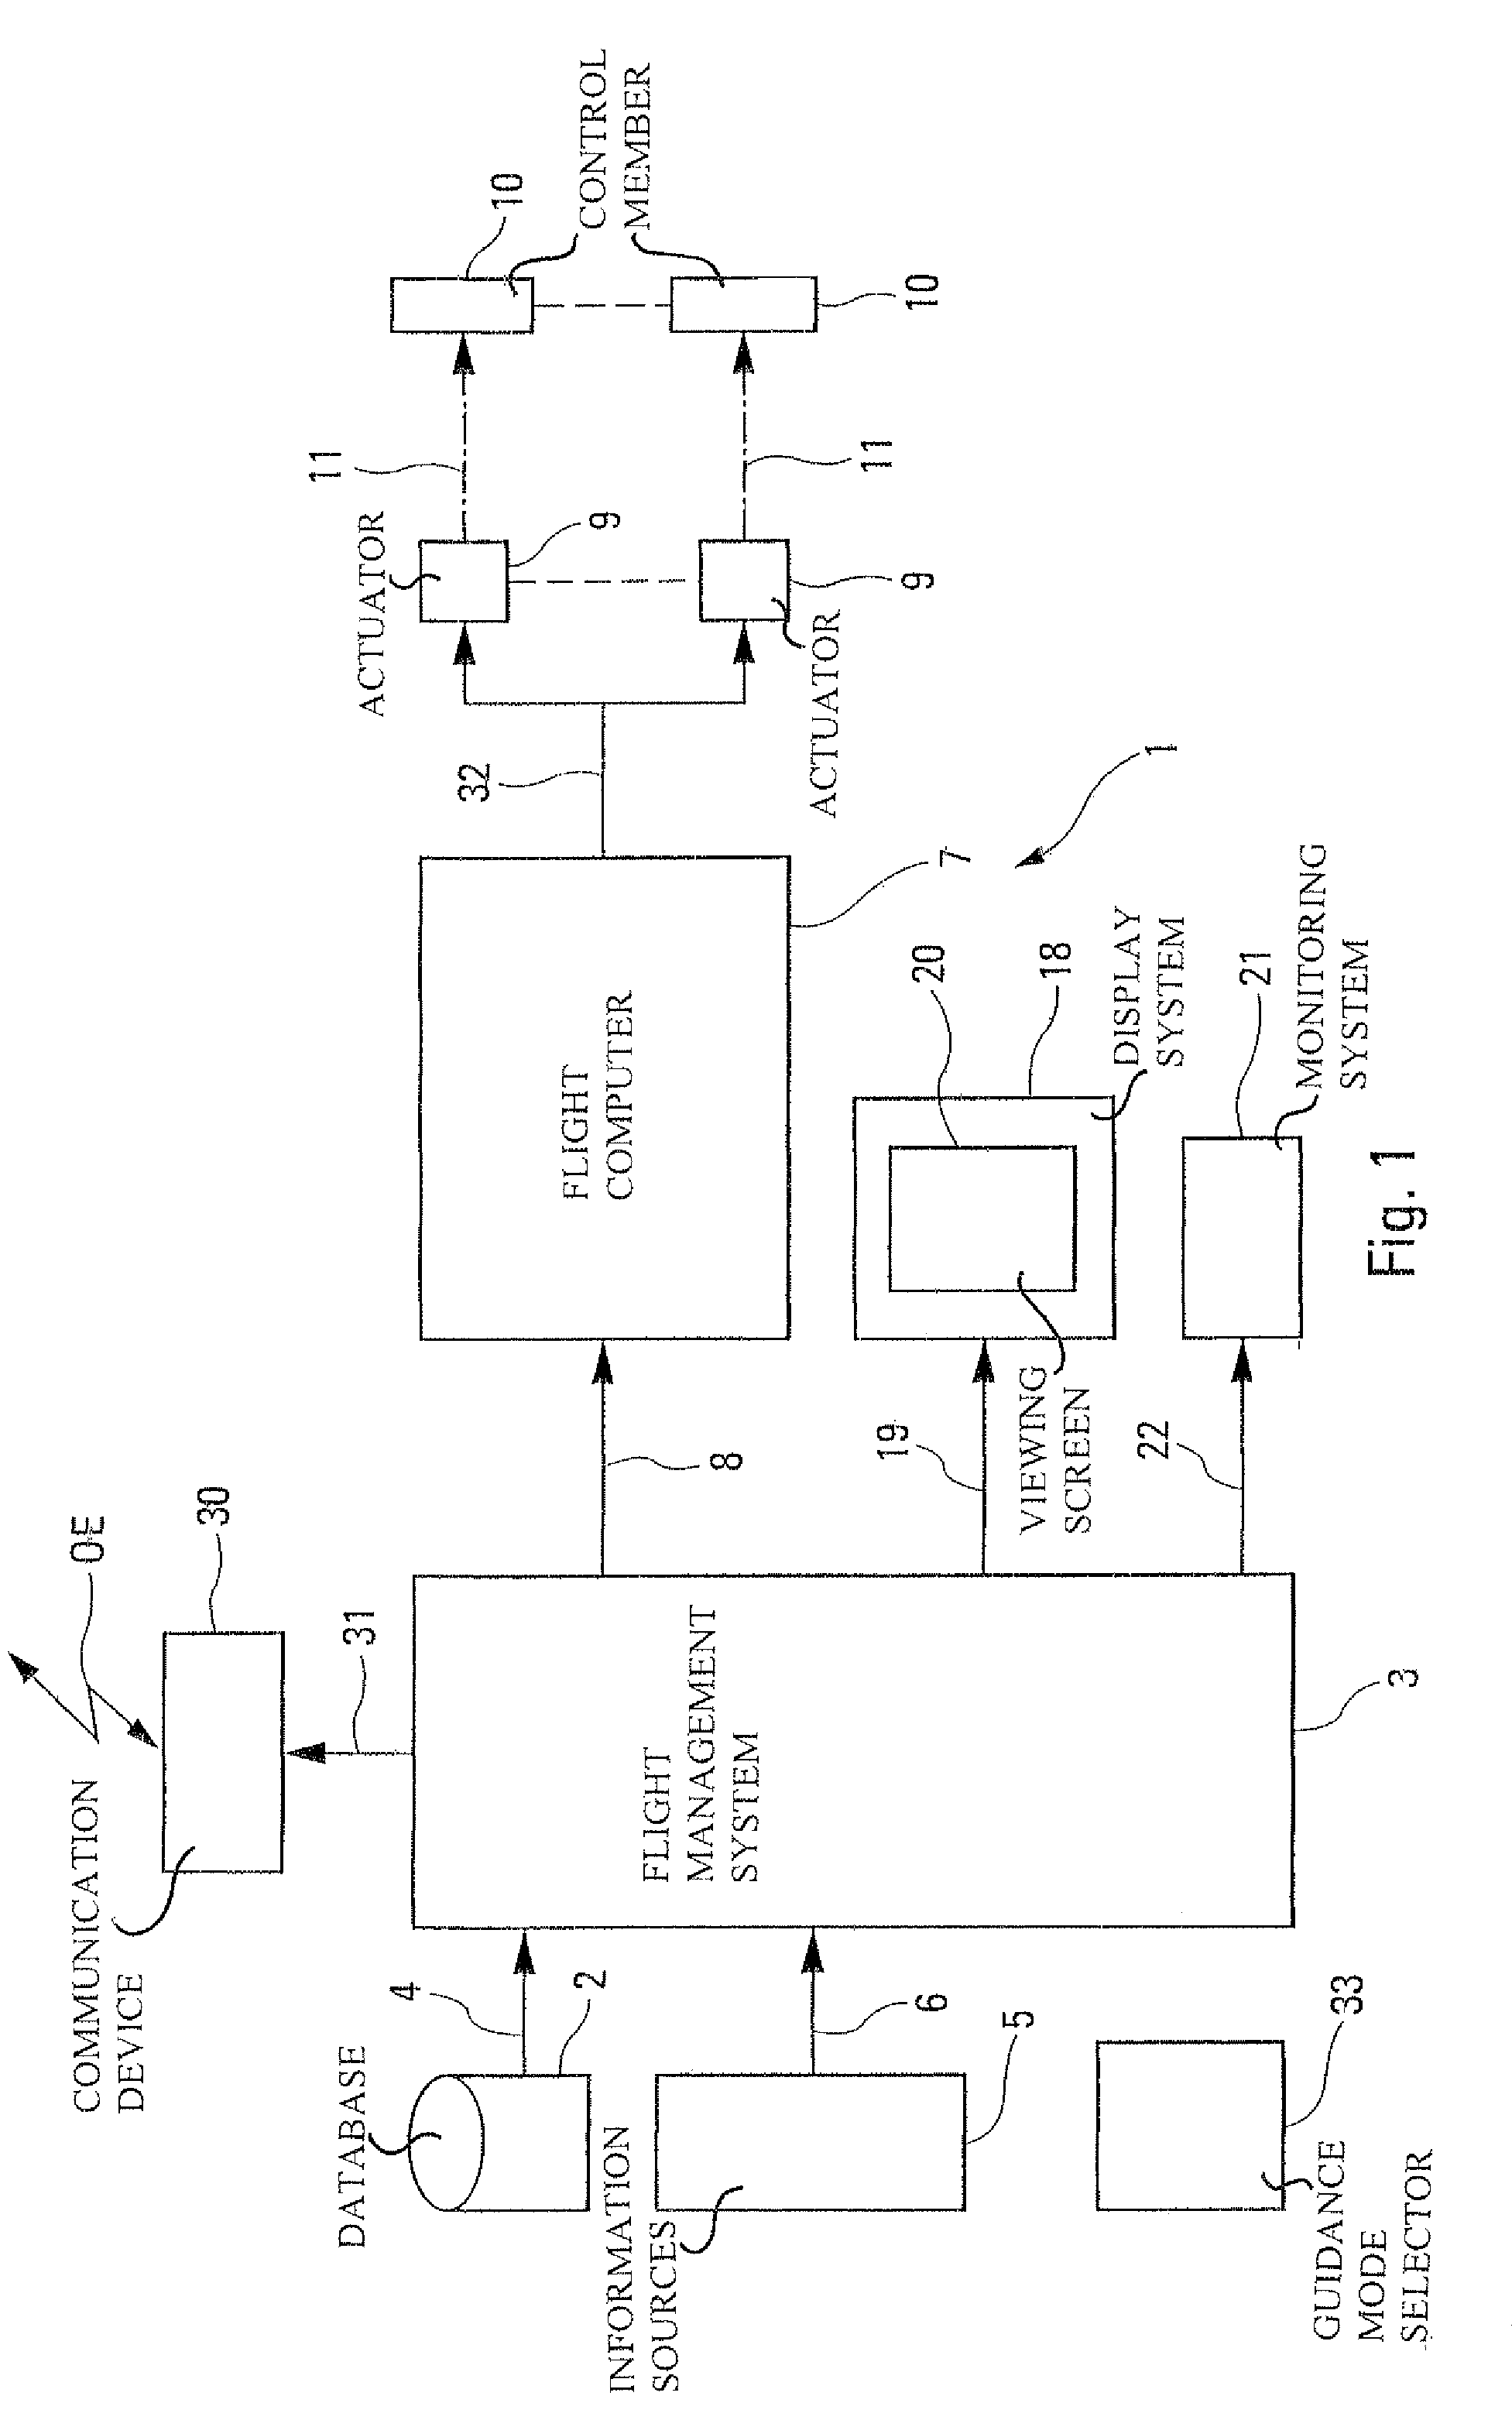 Device for guiding an aircraft along a flight trajectory